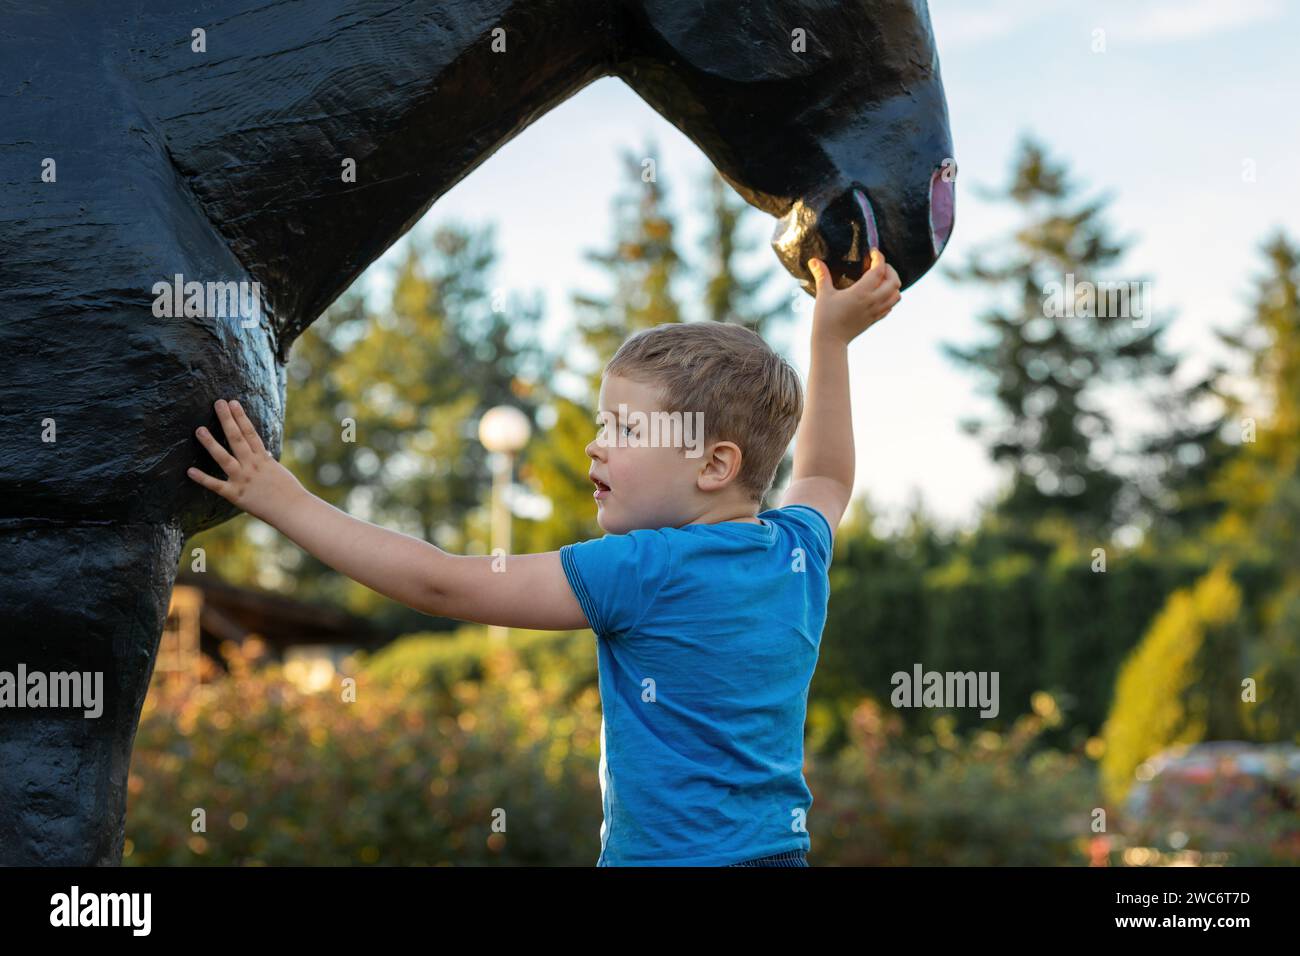 Close-up portrait of a cute little boy next to the muzzle of a big black wooden horse. Stock Photo